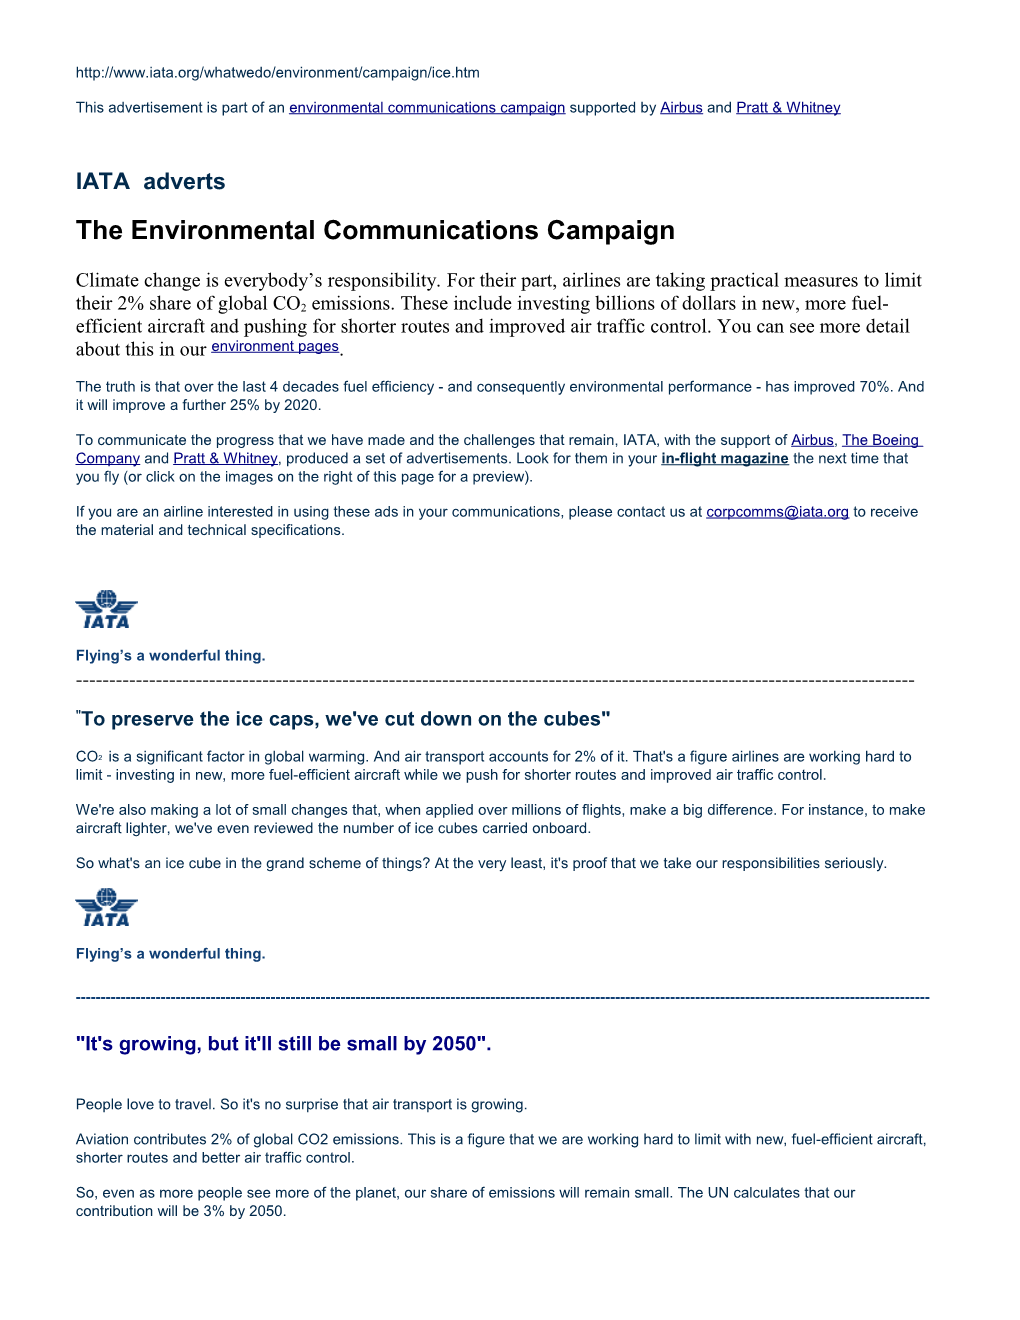 The Environmental Communications Campaign